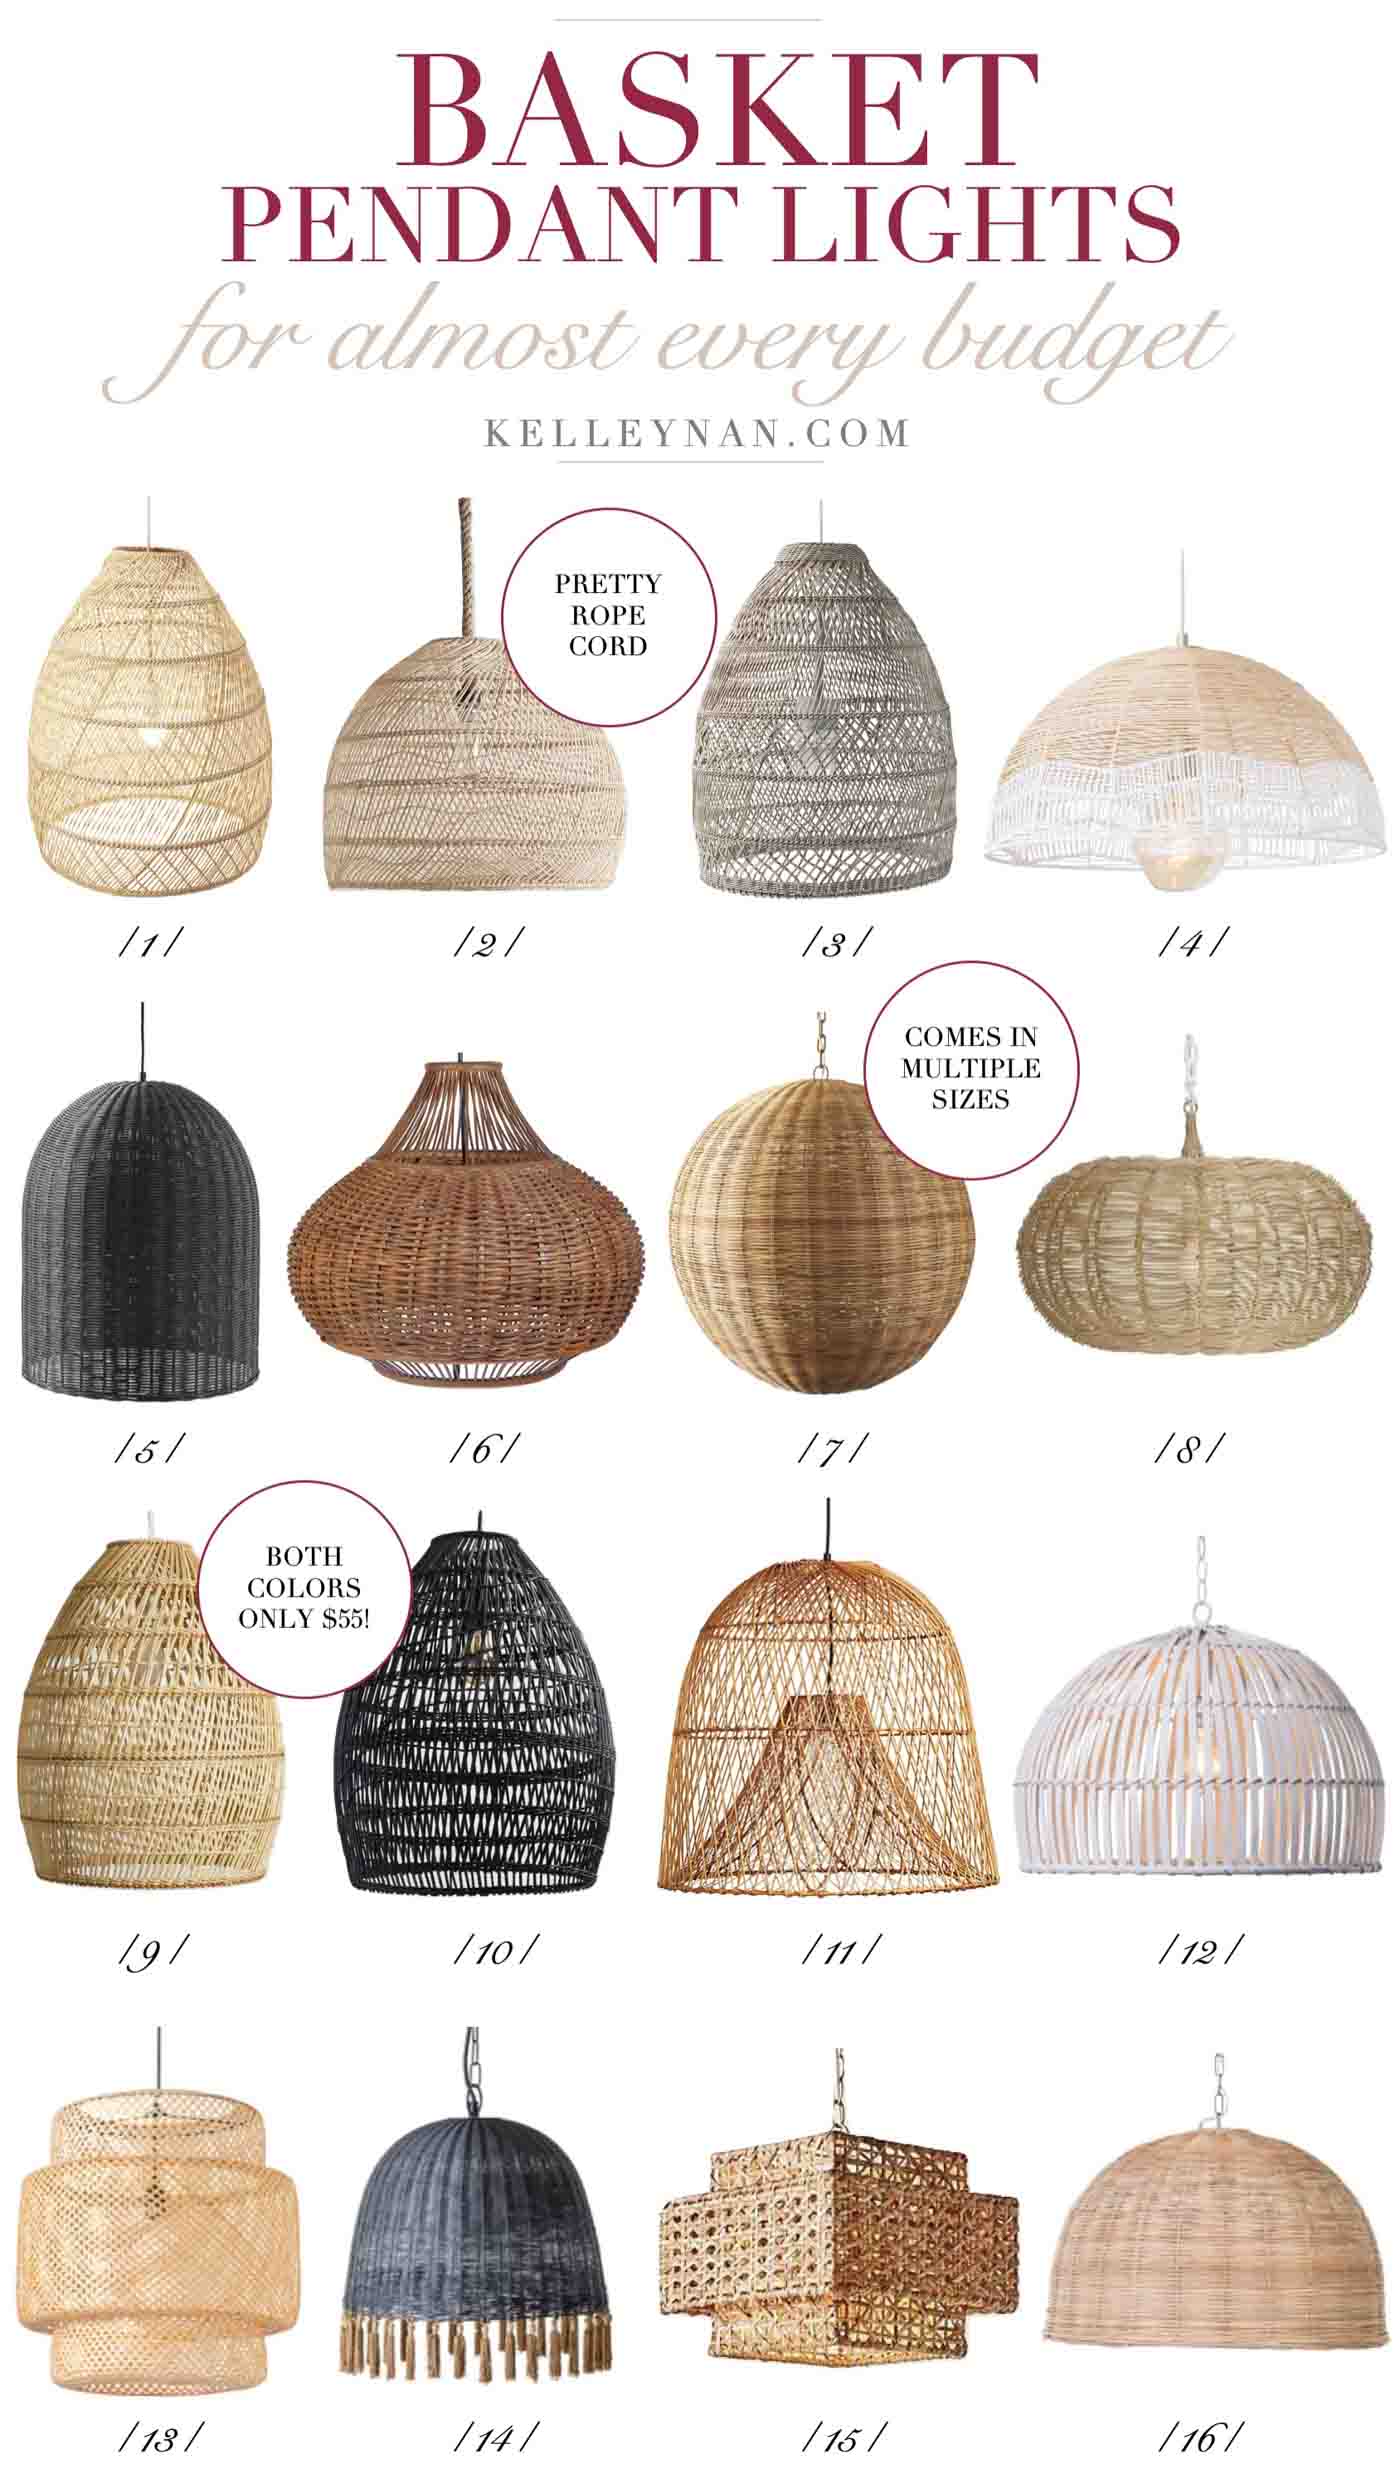 The best affordable woven basket pendant lights for the kitchen (or any room!)